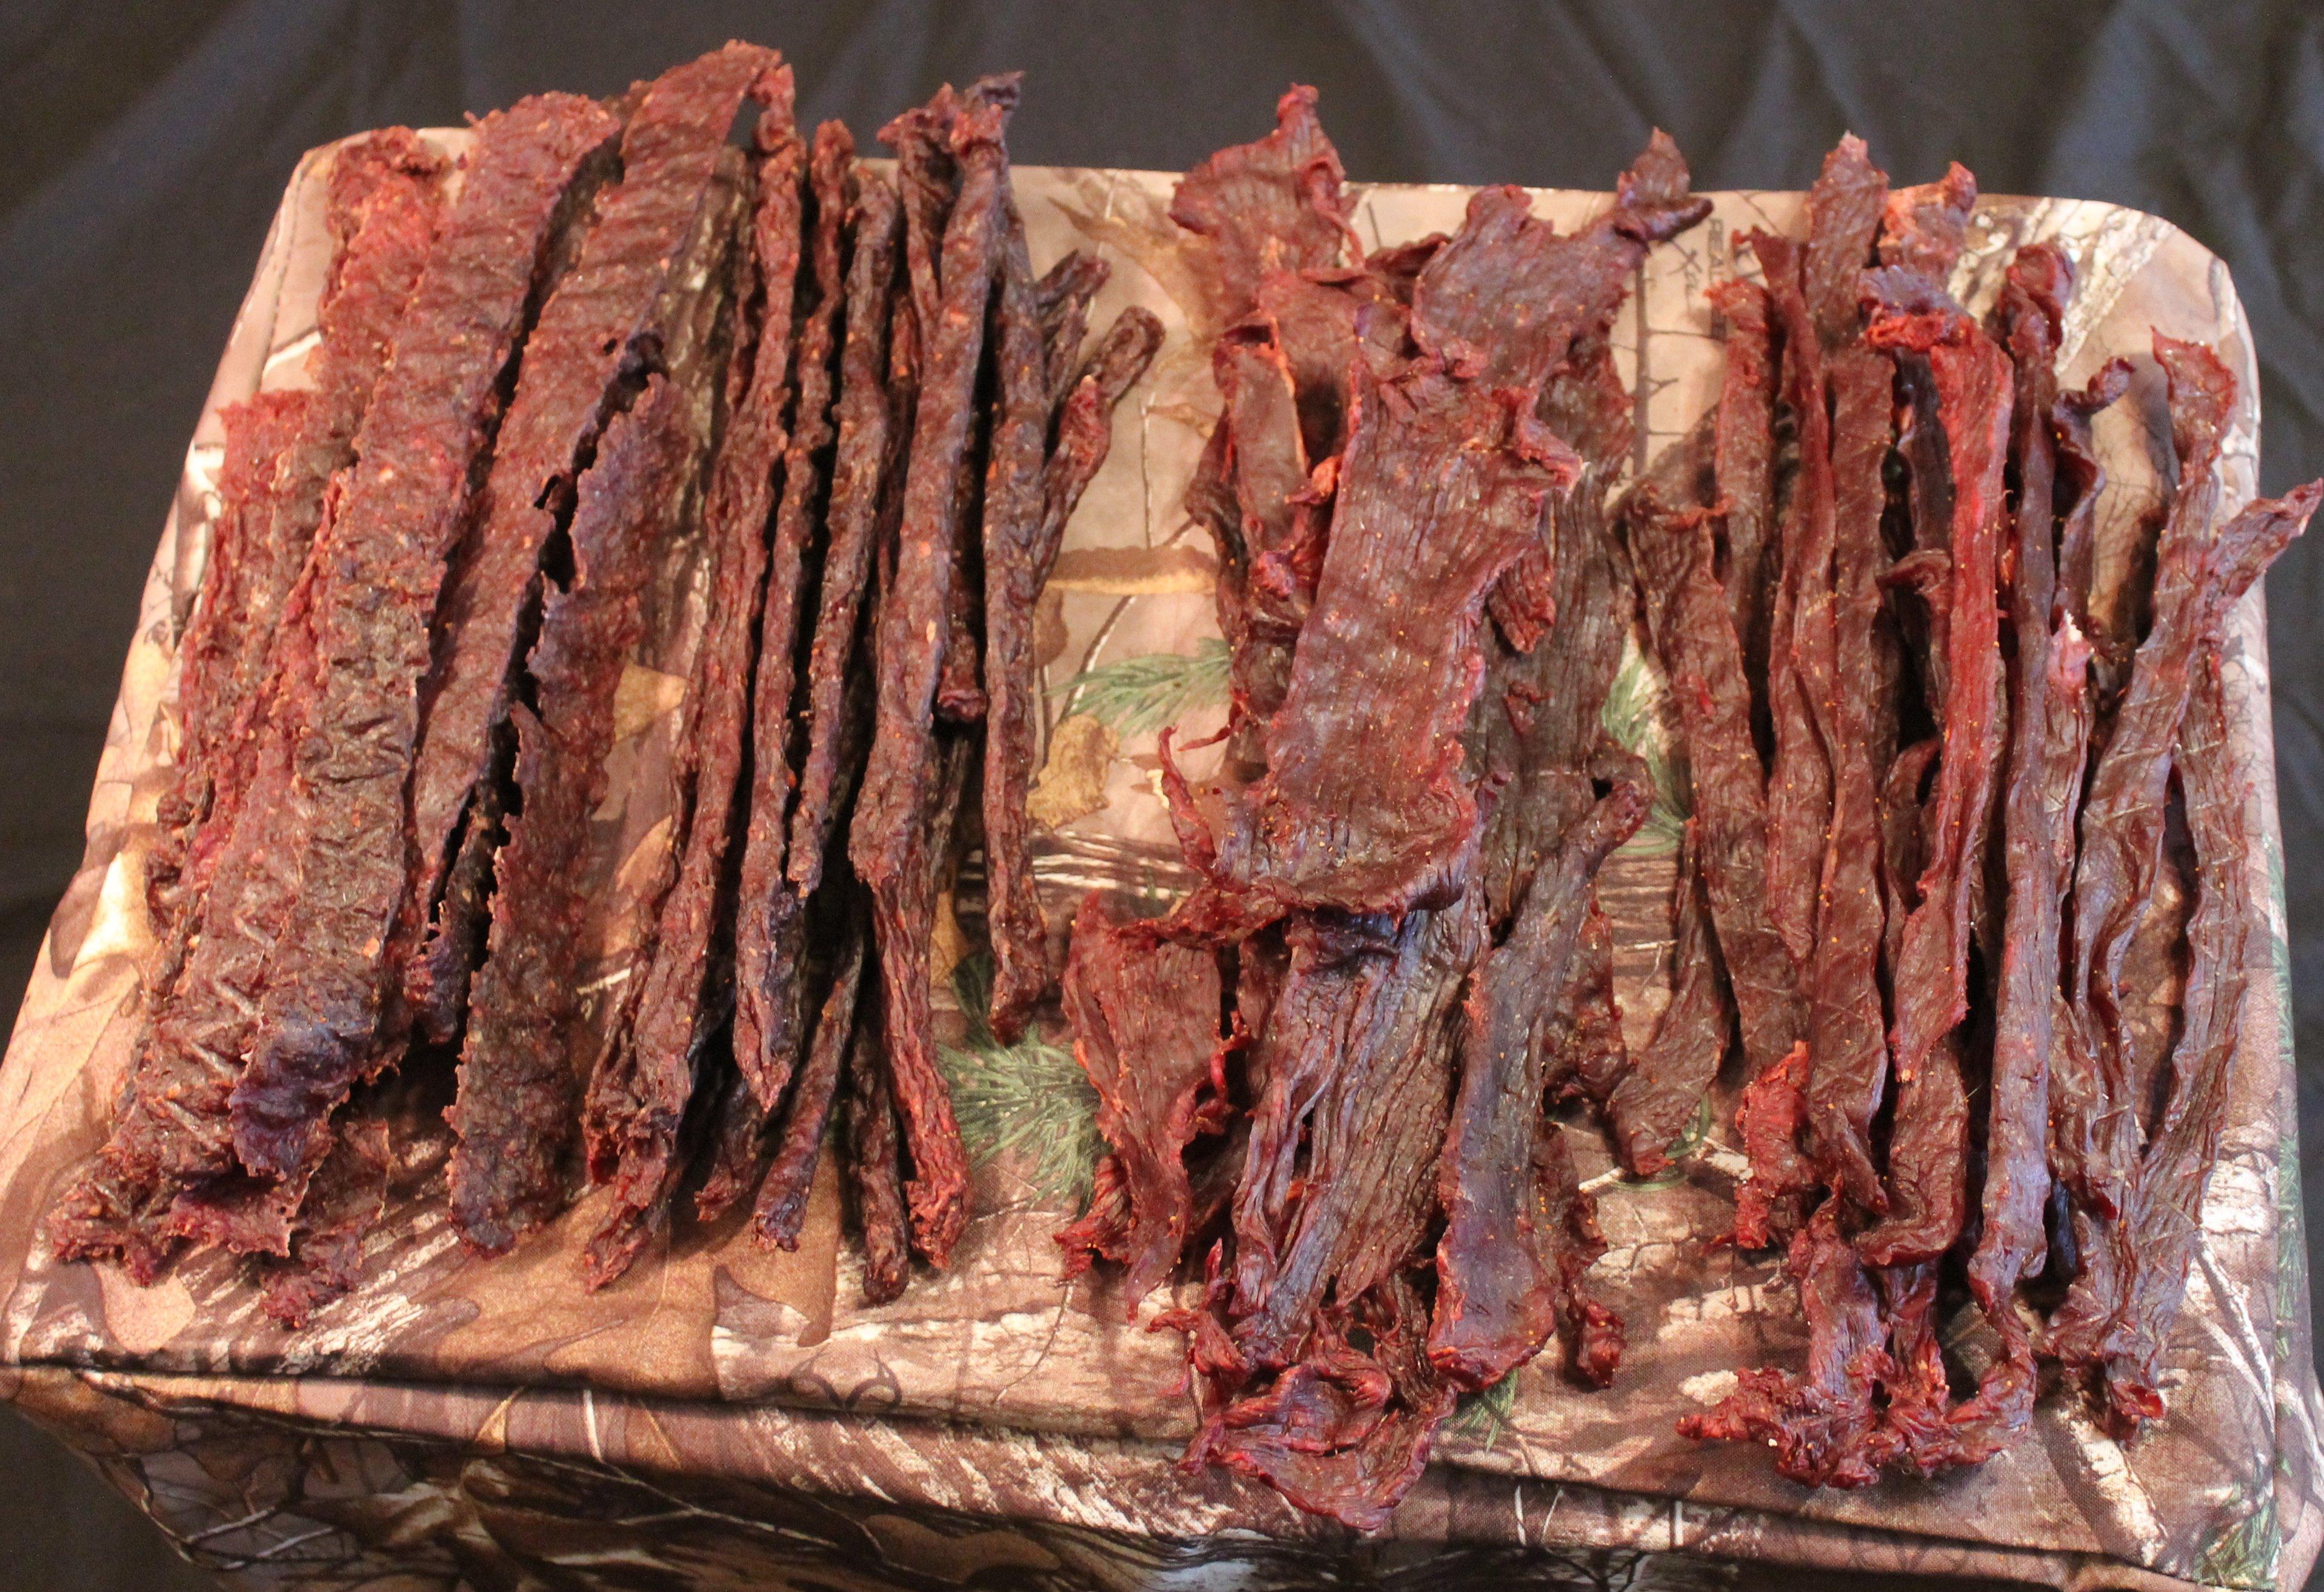 Four styles of finished jerky.